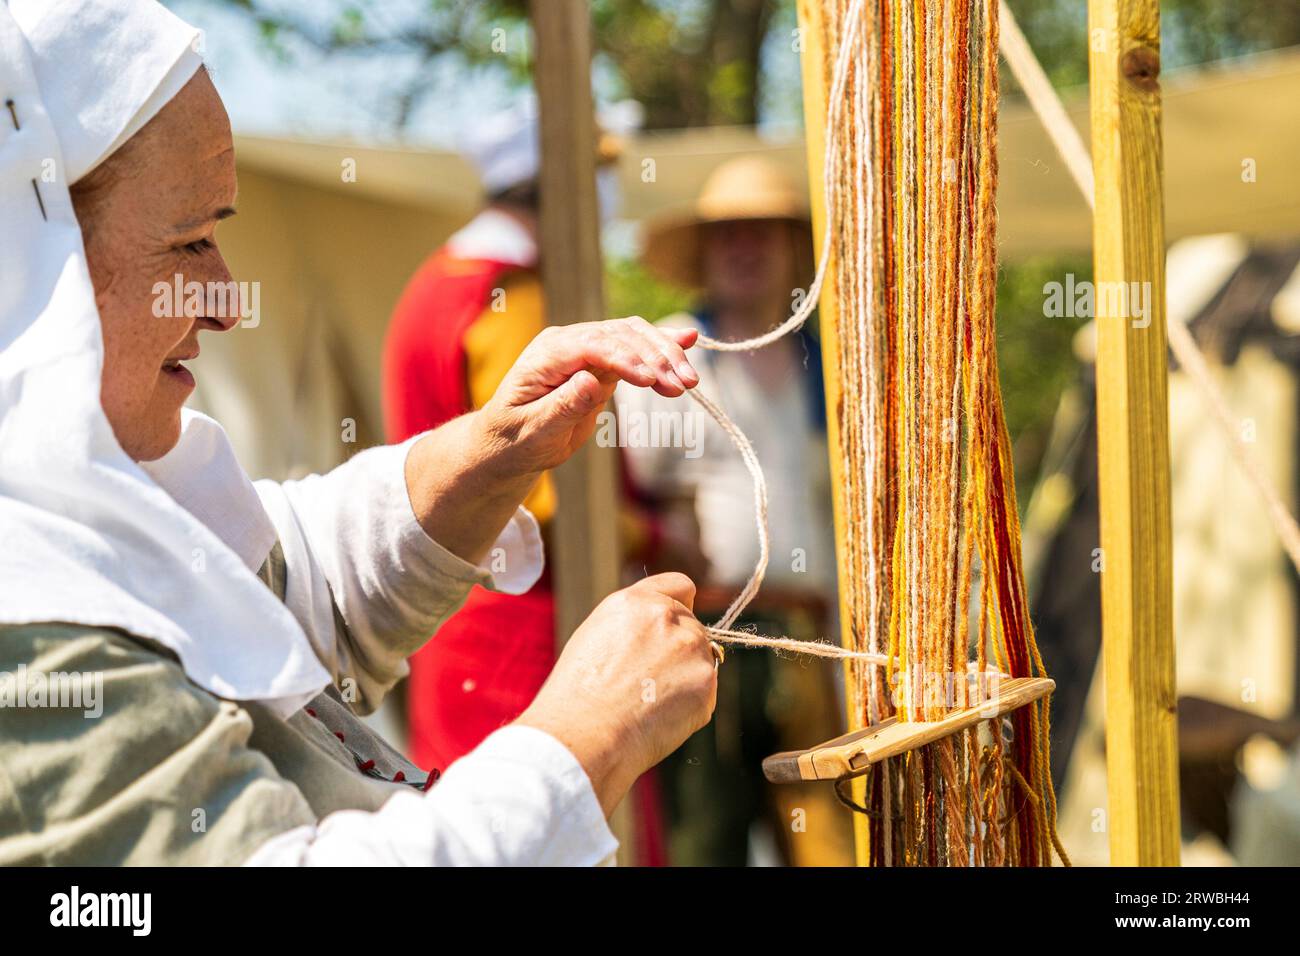 Medieval living history event. Close up of a middle aged lady in middle ages period costume, working on a loom weaving threads of cloth. Stock Photo